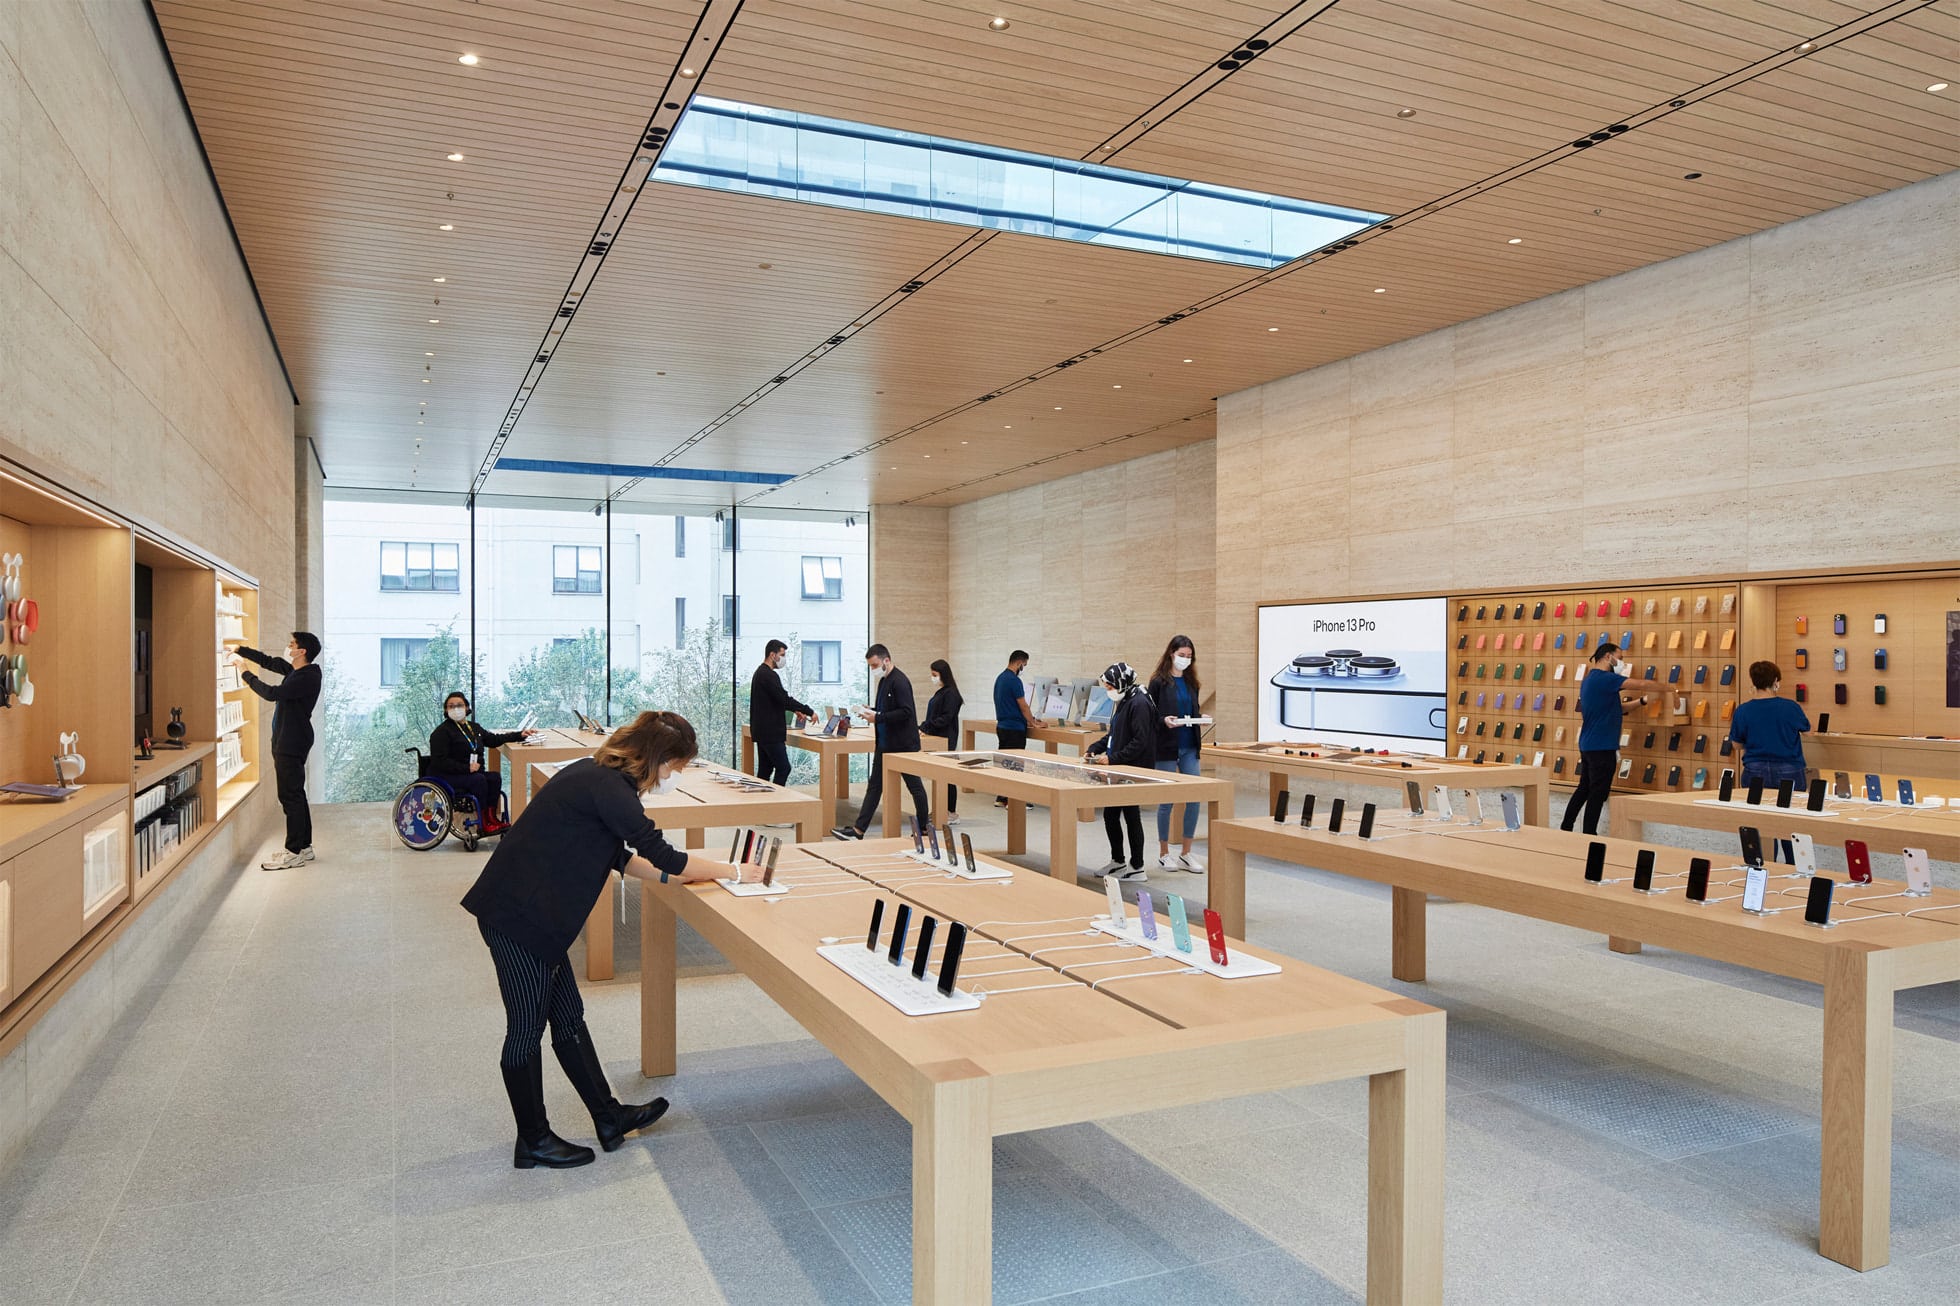 The upper level is flanked by avenues, where customers can explore Apple’s latest products and services.